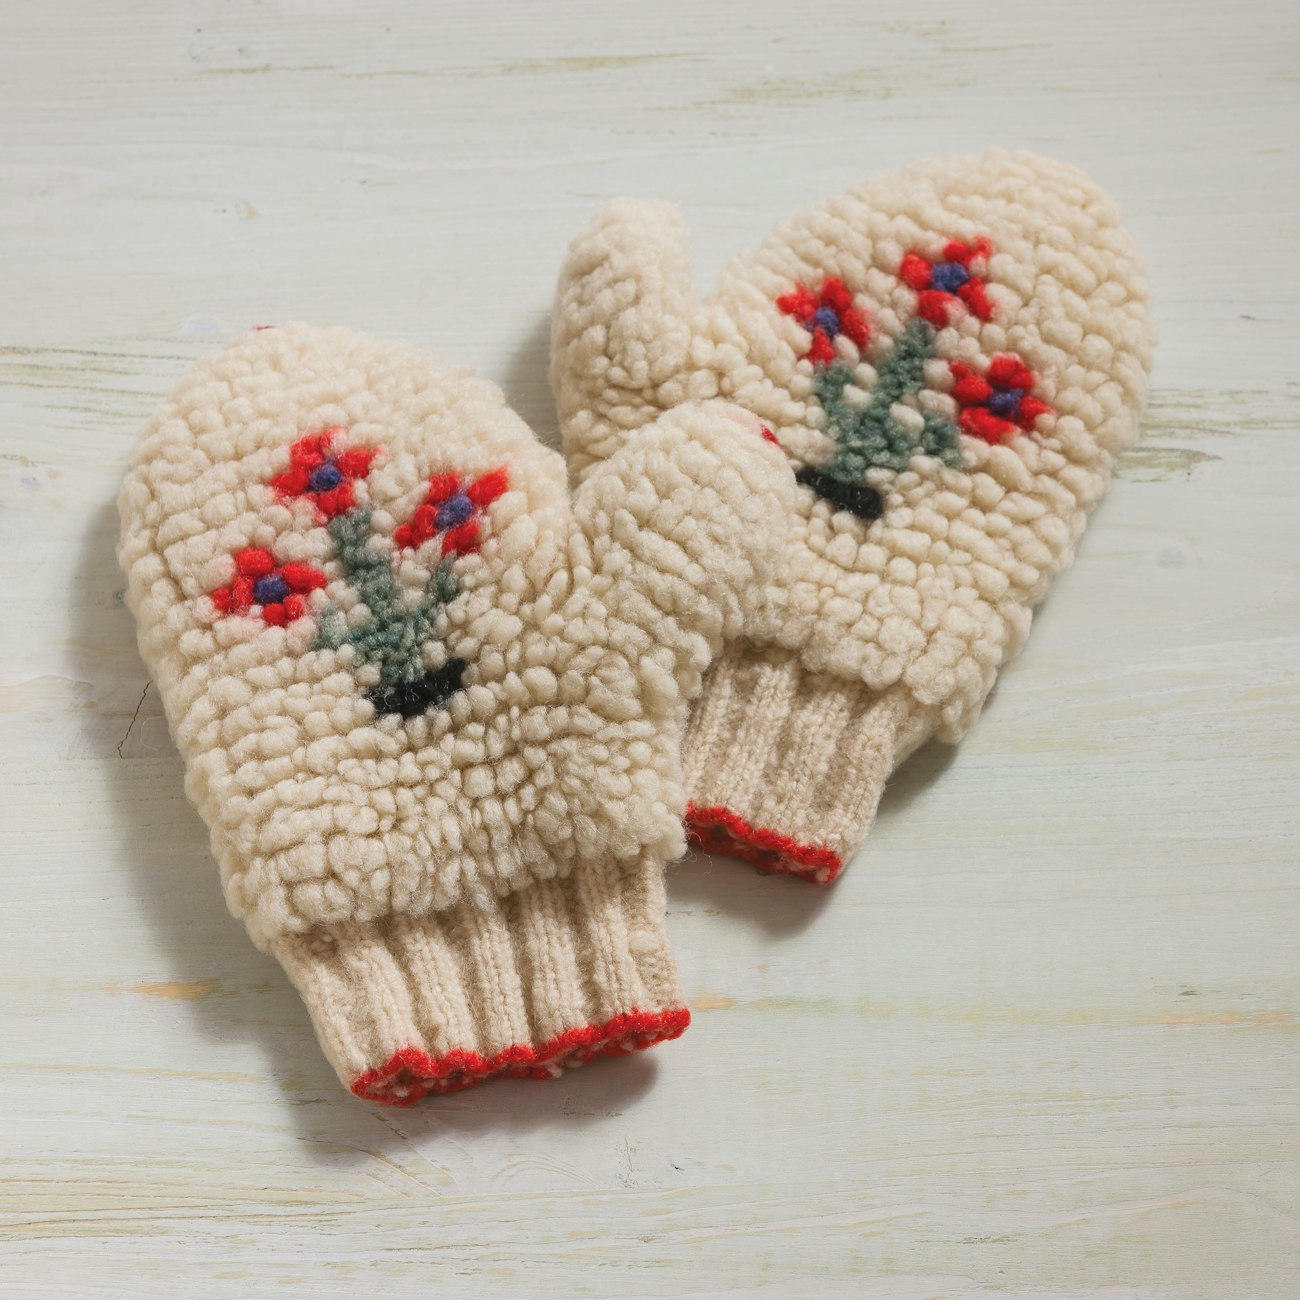 Donna Druchunas knitted loops with a second strand of yarn carried along as the knitting was worked, then cut, brushed, and trimmed them to create the finished texture in her warm and fuzzy Vermont Carriage Mittens. Photo by Joe Coca